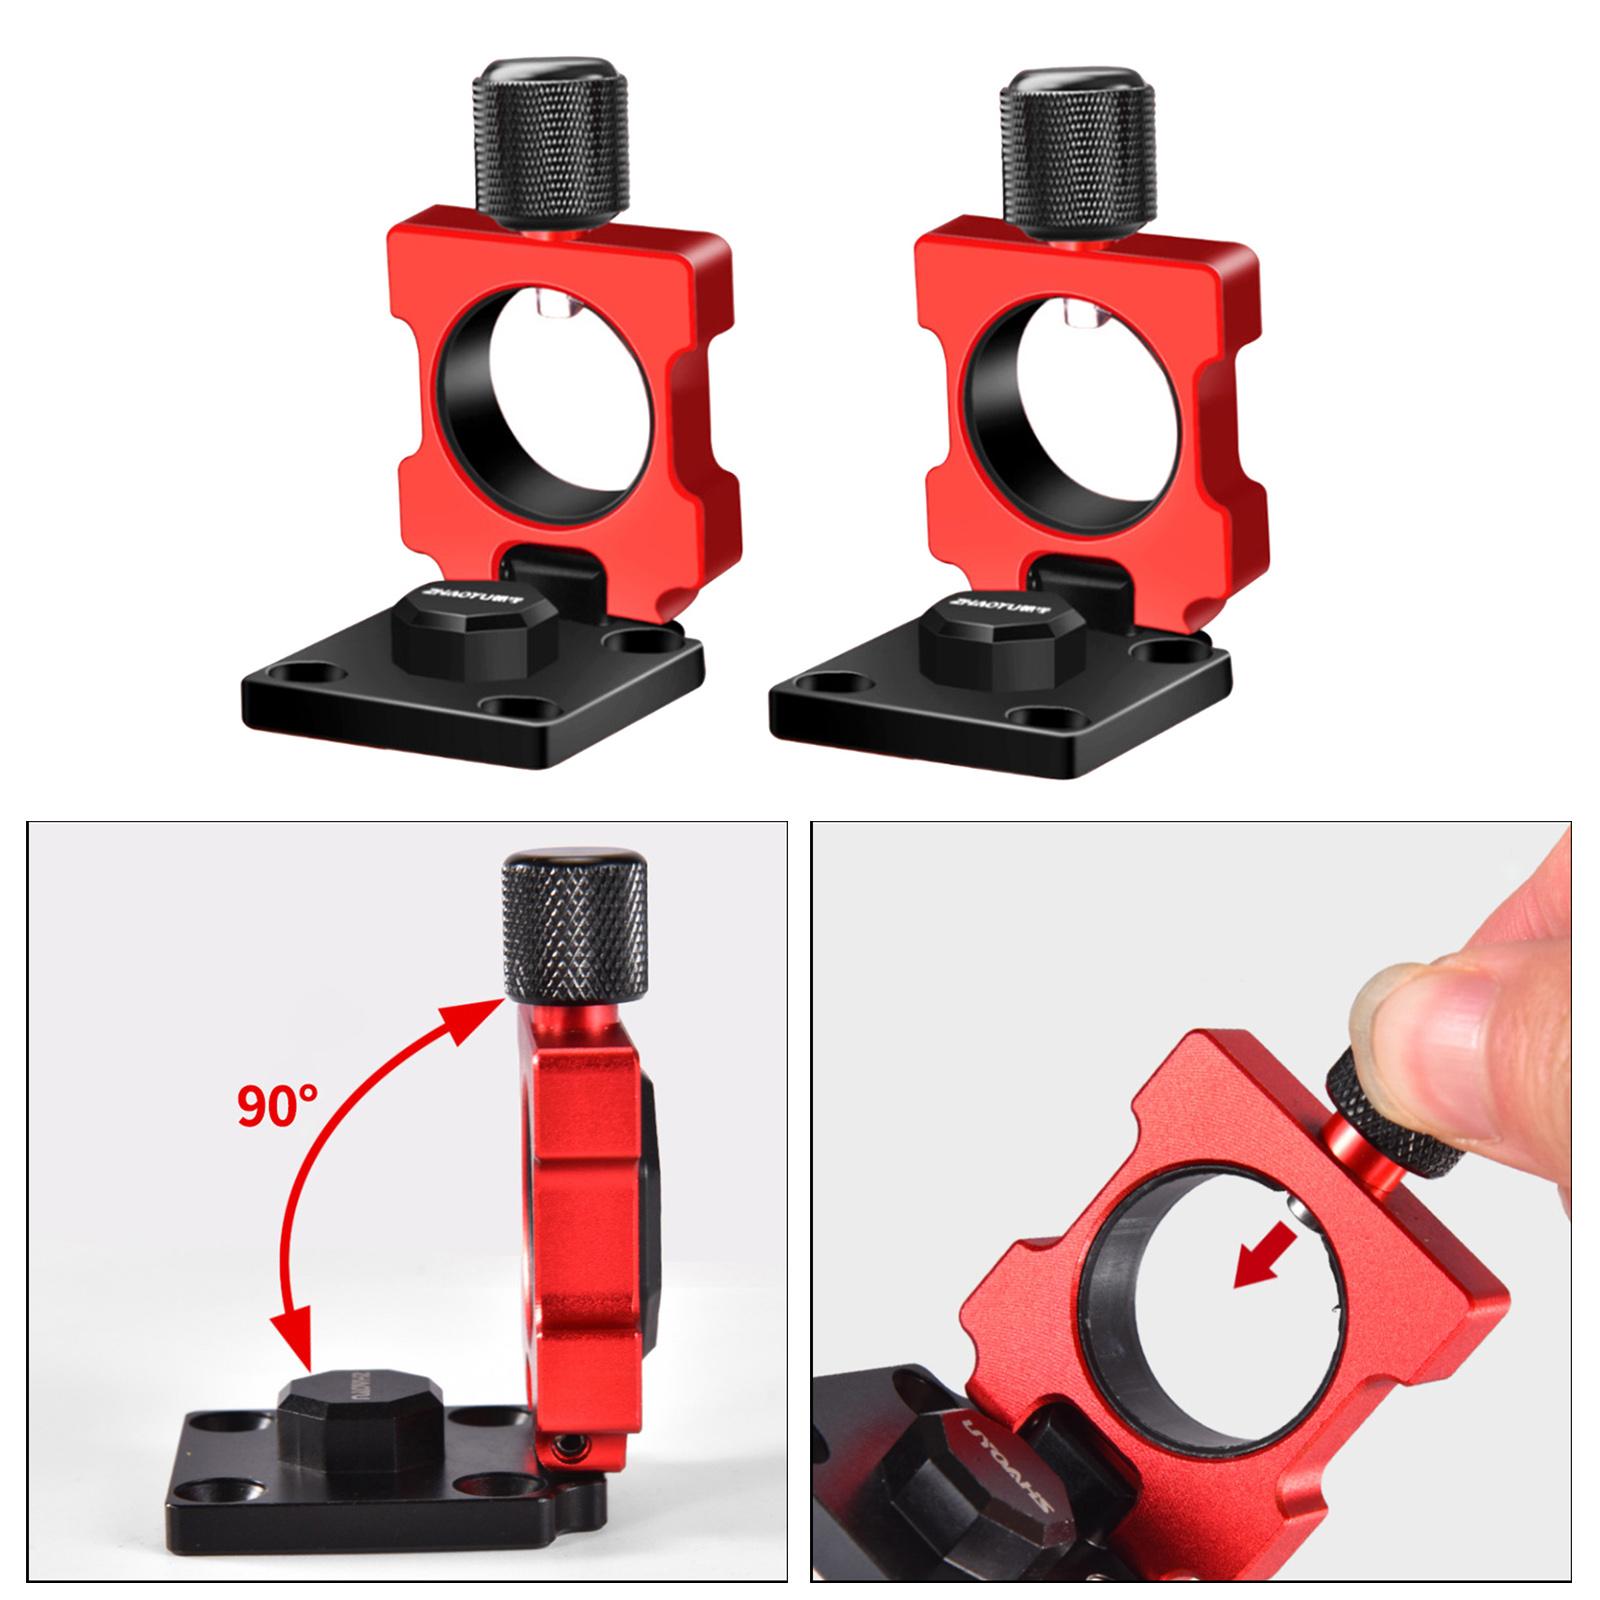 Universal Aluminum Alloy Beach Fishing Chair Umbrella Holder Fixed Clip Bracket Red - image 4 of 8